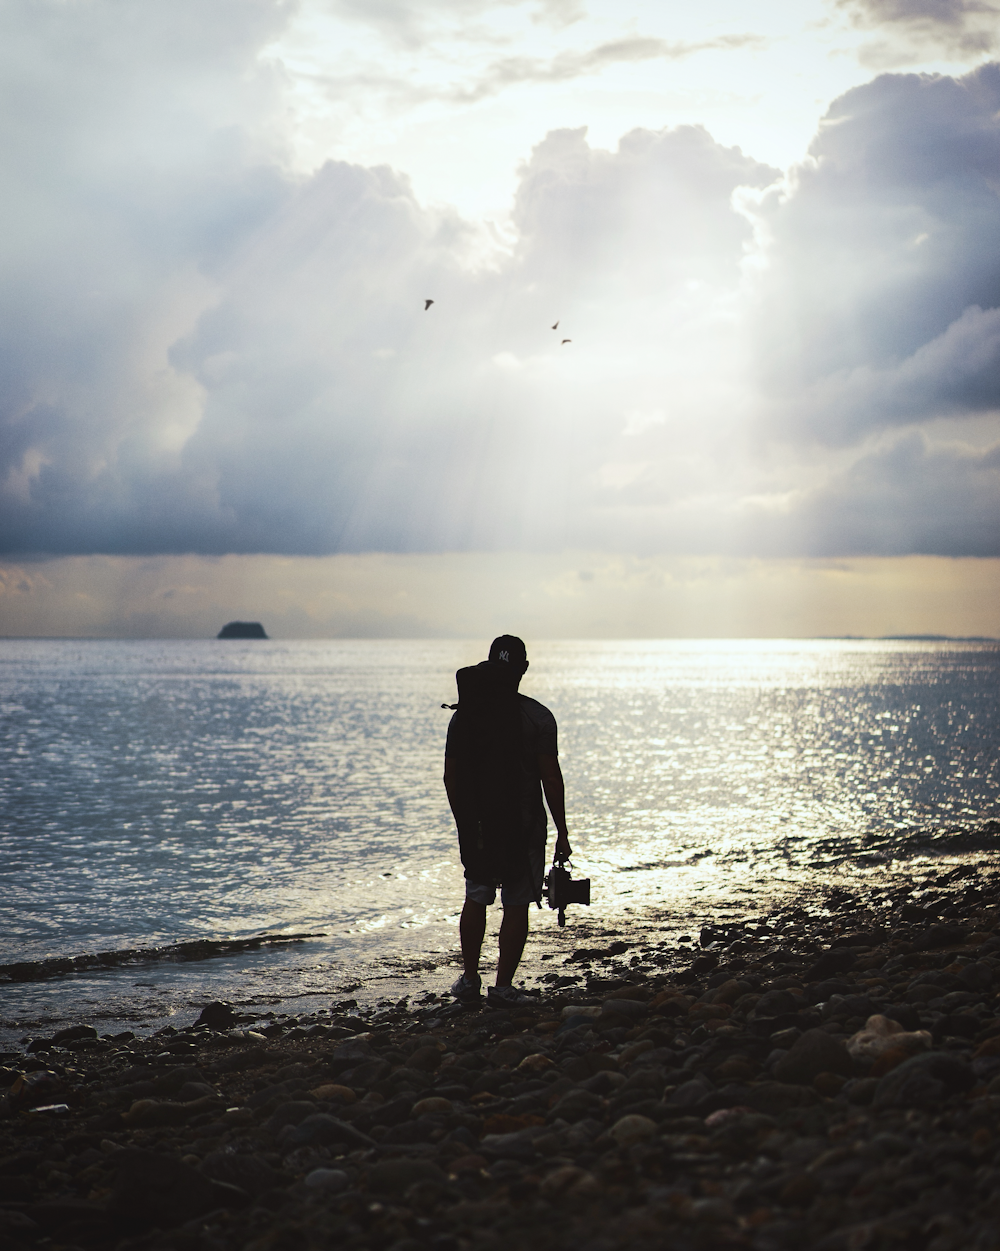 silhouette of man standing on seashore during daytime